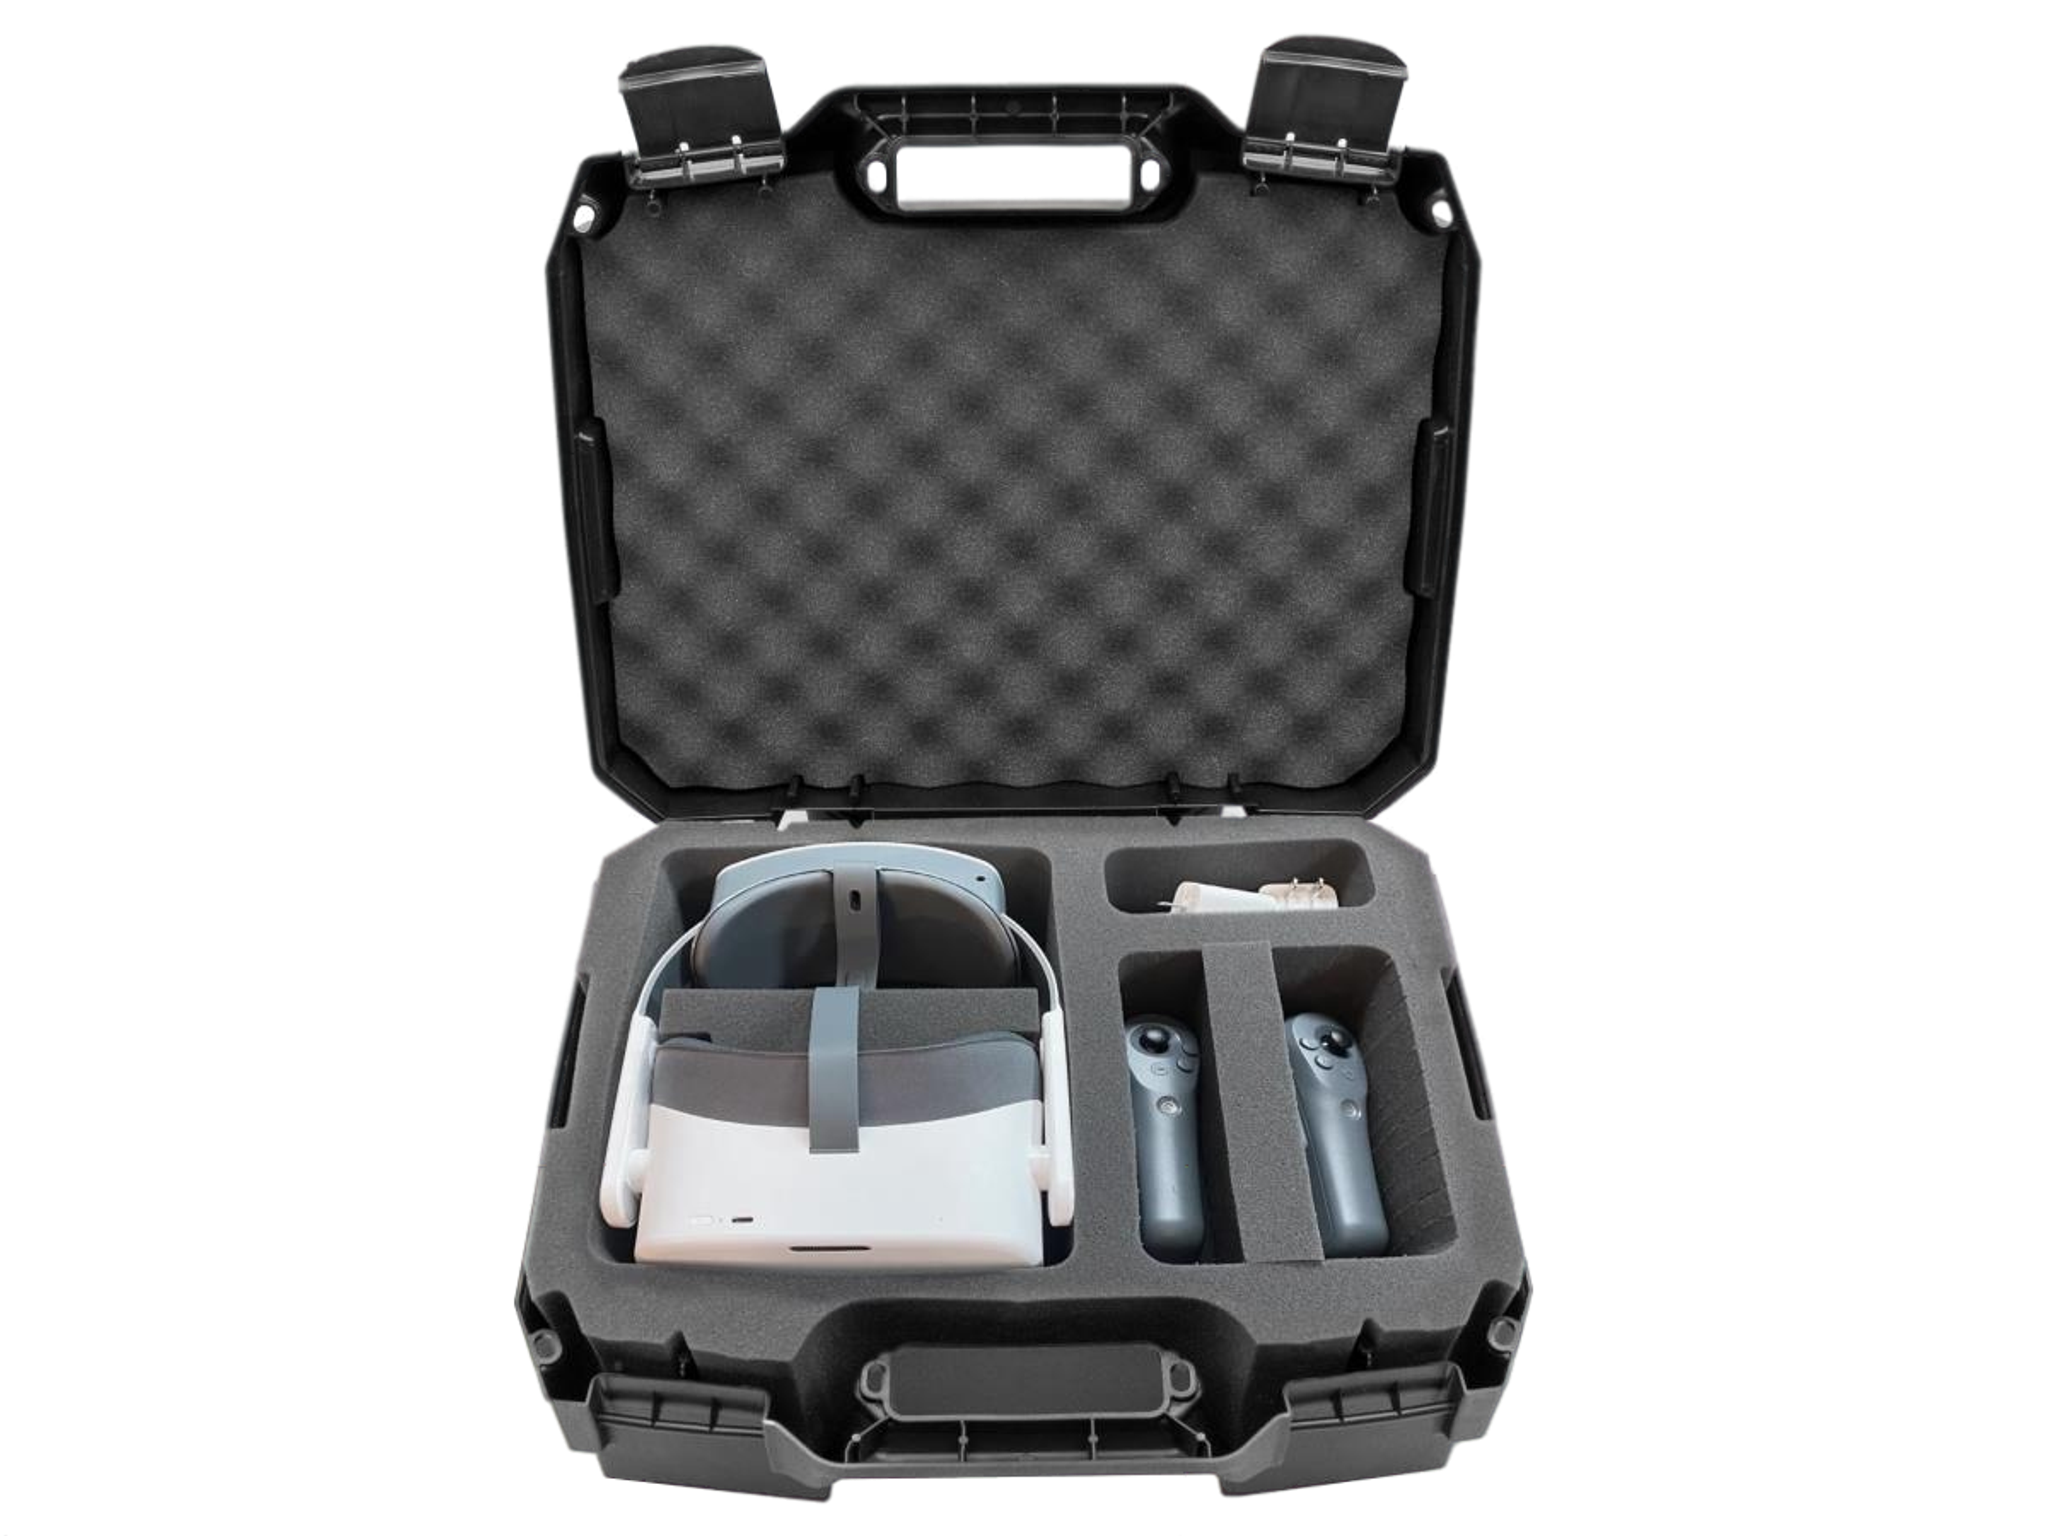 Travel Case for Pico VR Headsets